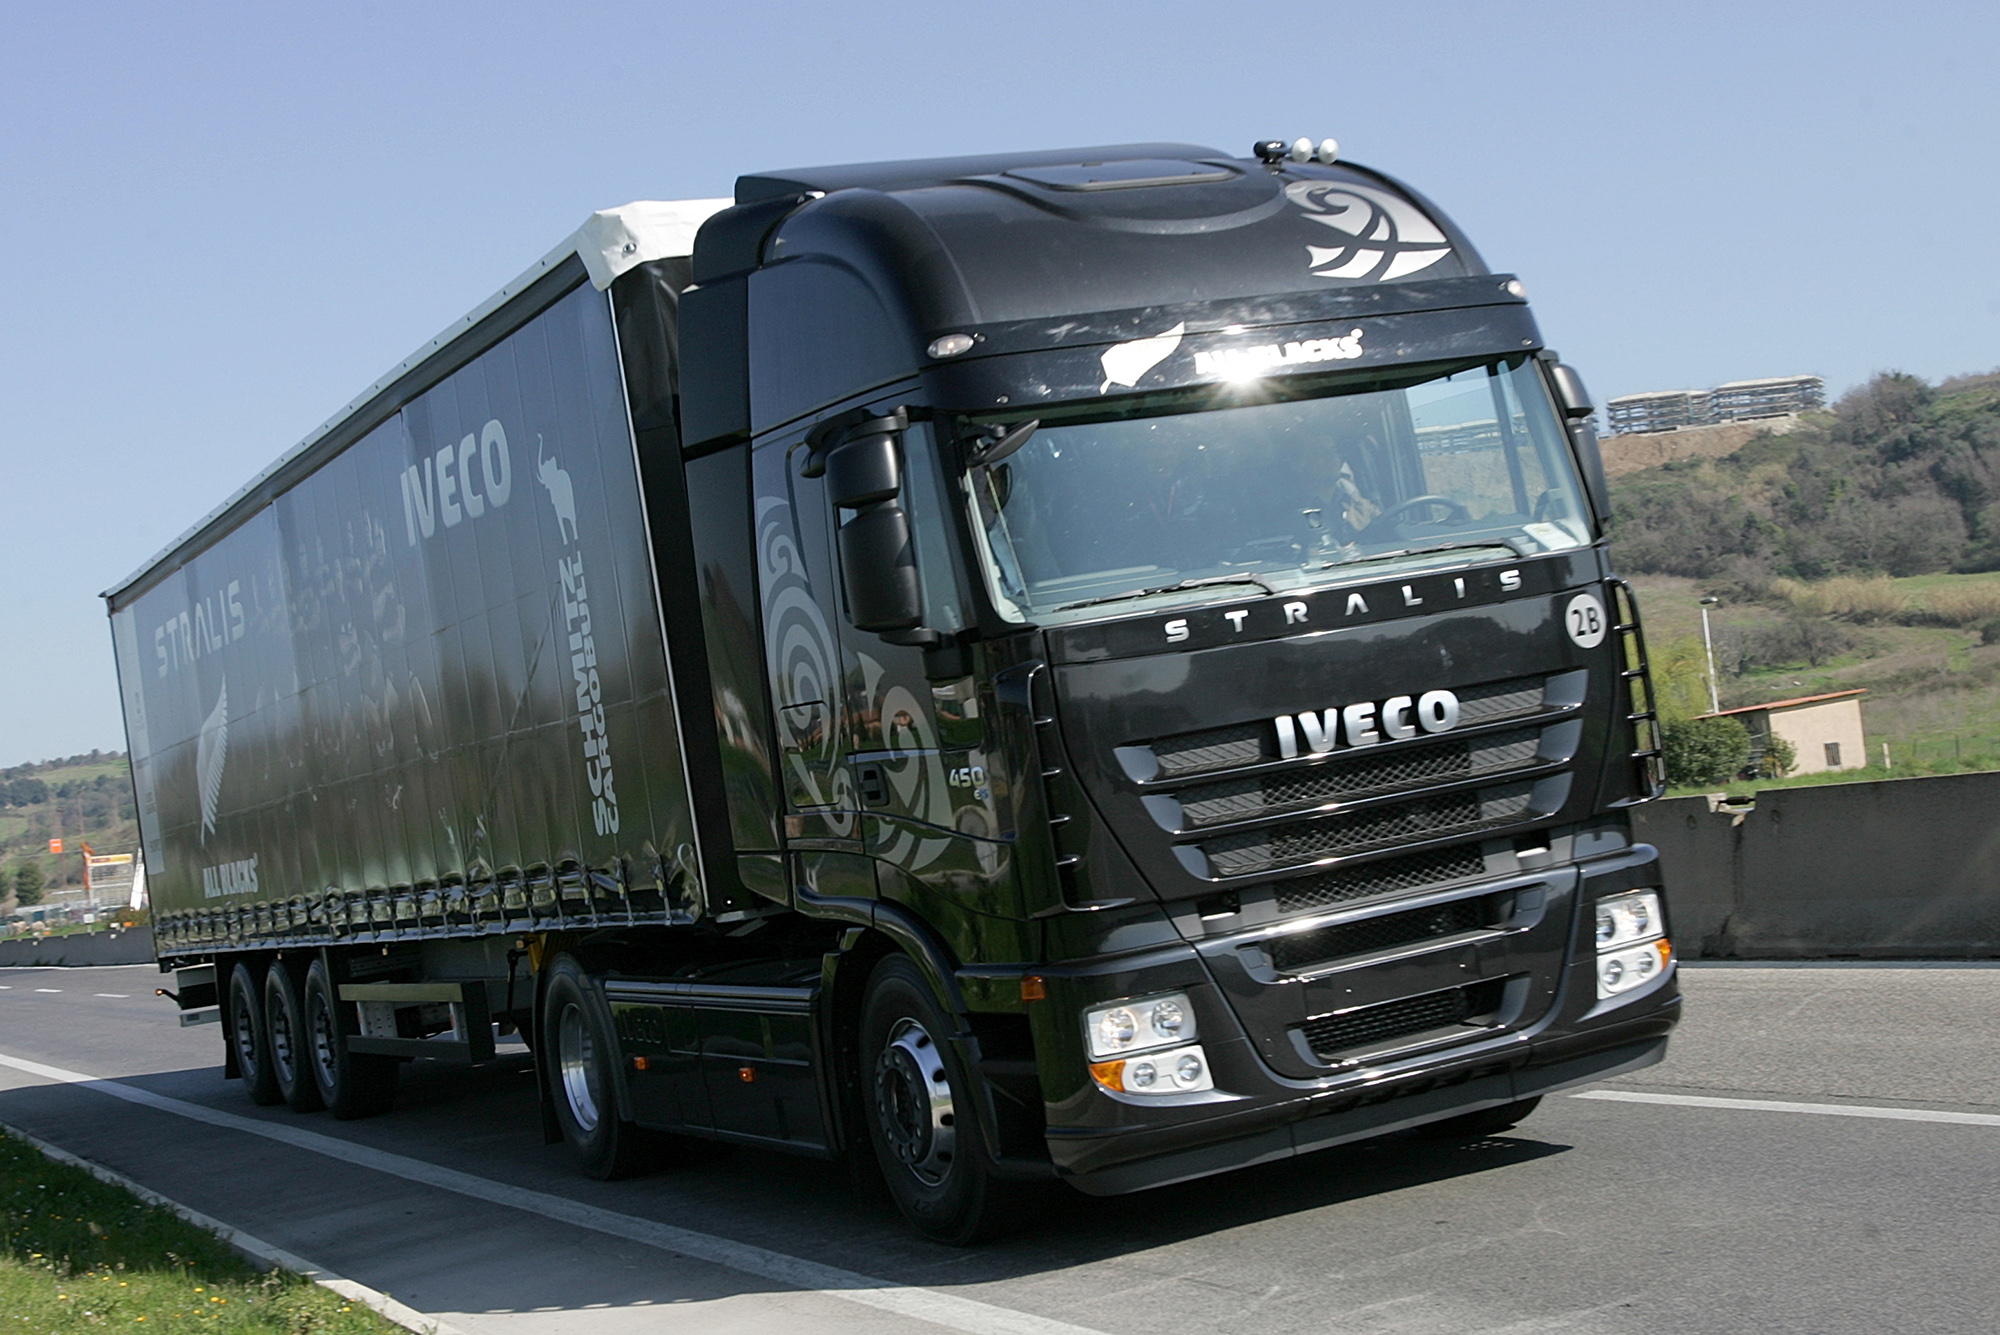 High Resolution Wallpaper | Iveco Stralis 2000x1335 px